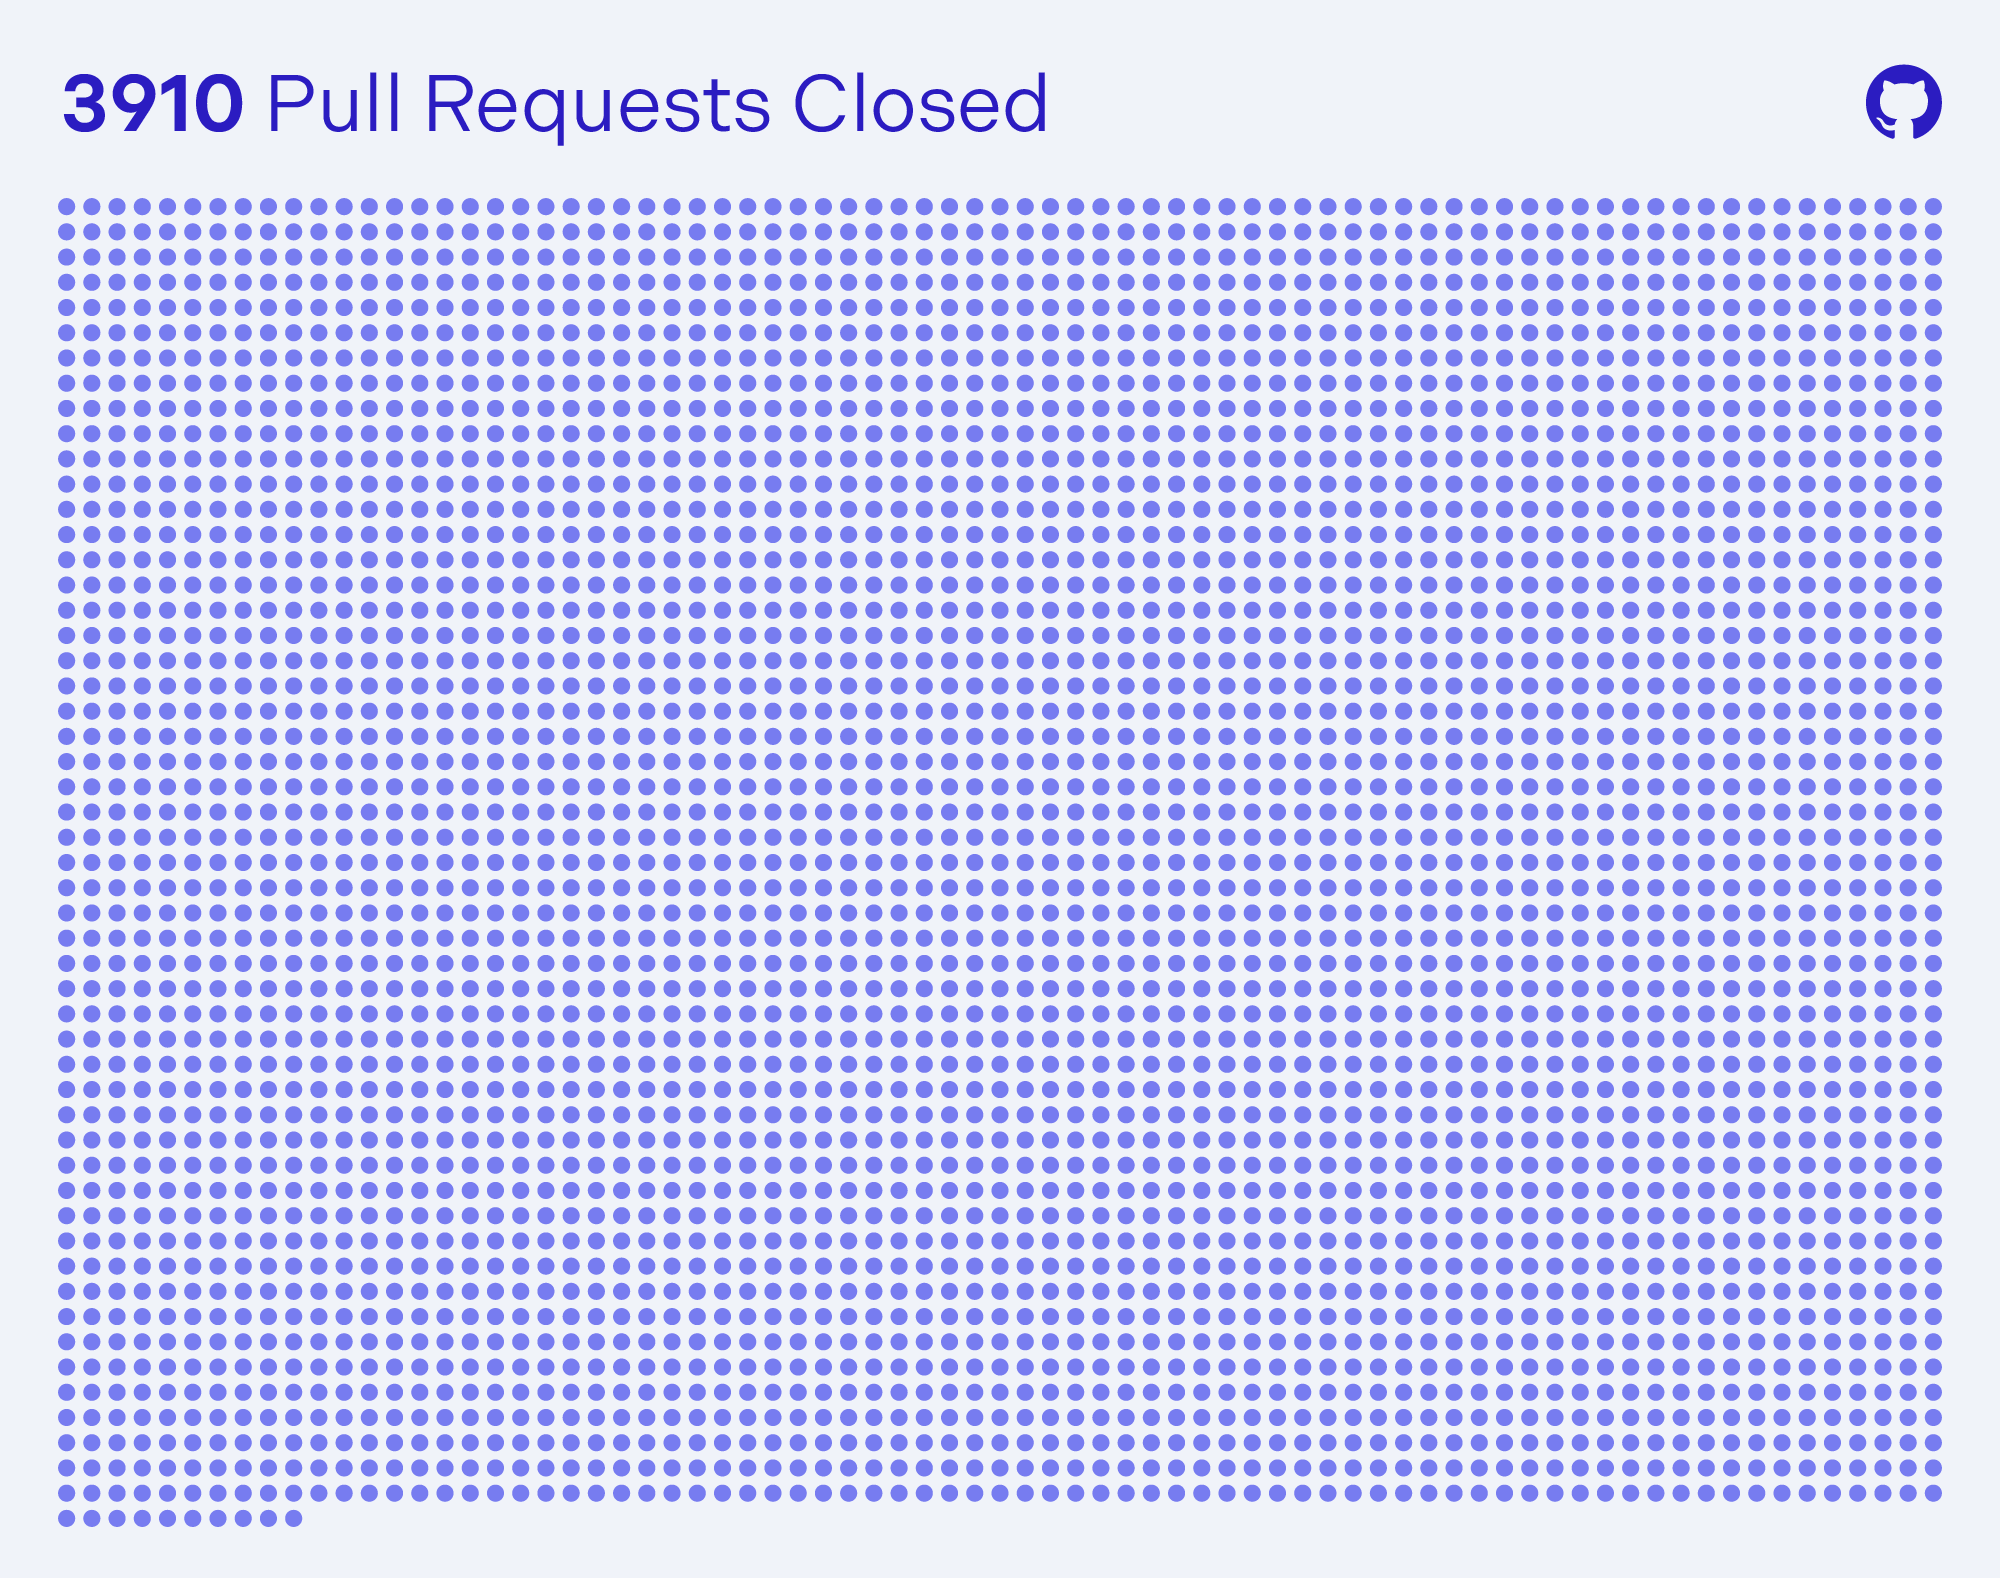 Pull Requests Closed: 3910